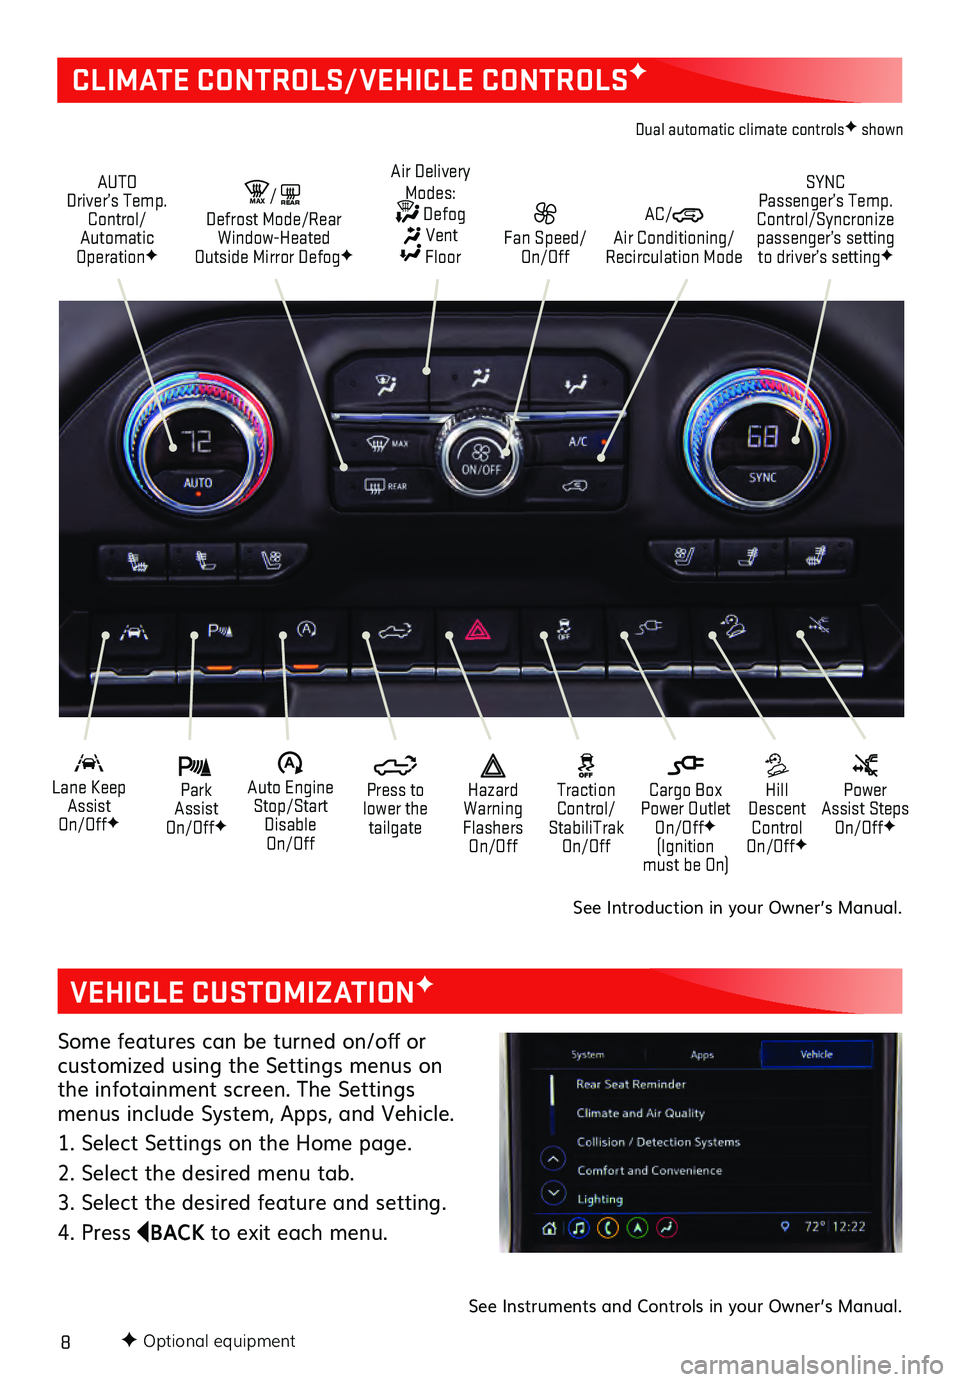 GMC SIERRA 2021  Get To Know Guide 8F Optional equipment
VEHICLE CUSTOMIZATIONF
Some features can be turned on/off or  cus tomized using the Settings menus on the infotainment screen. The Settings 
menus include System, Apps, and Vehic